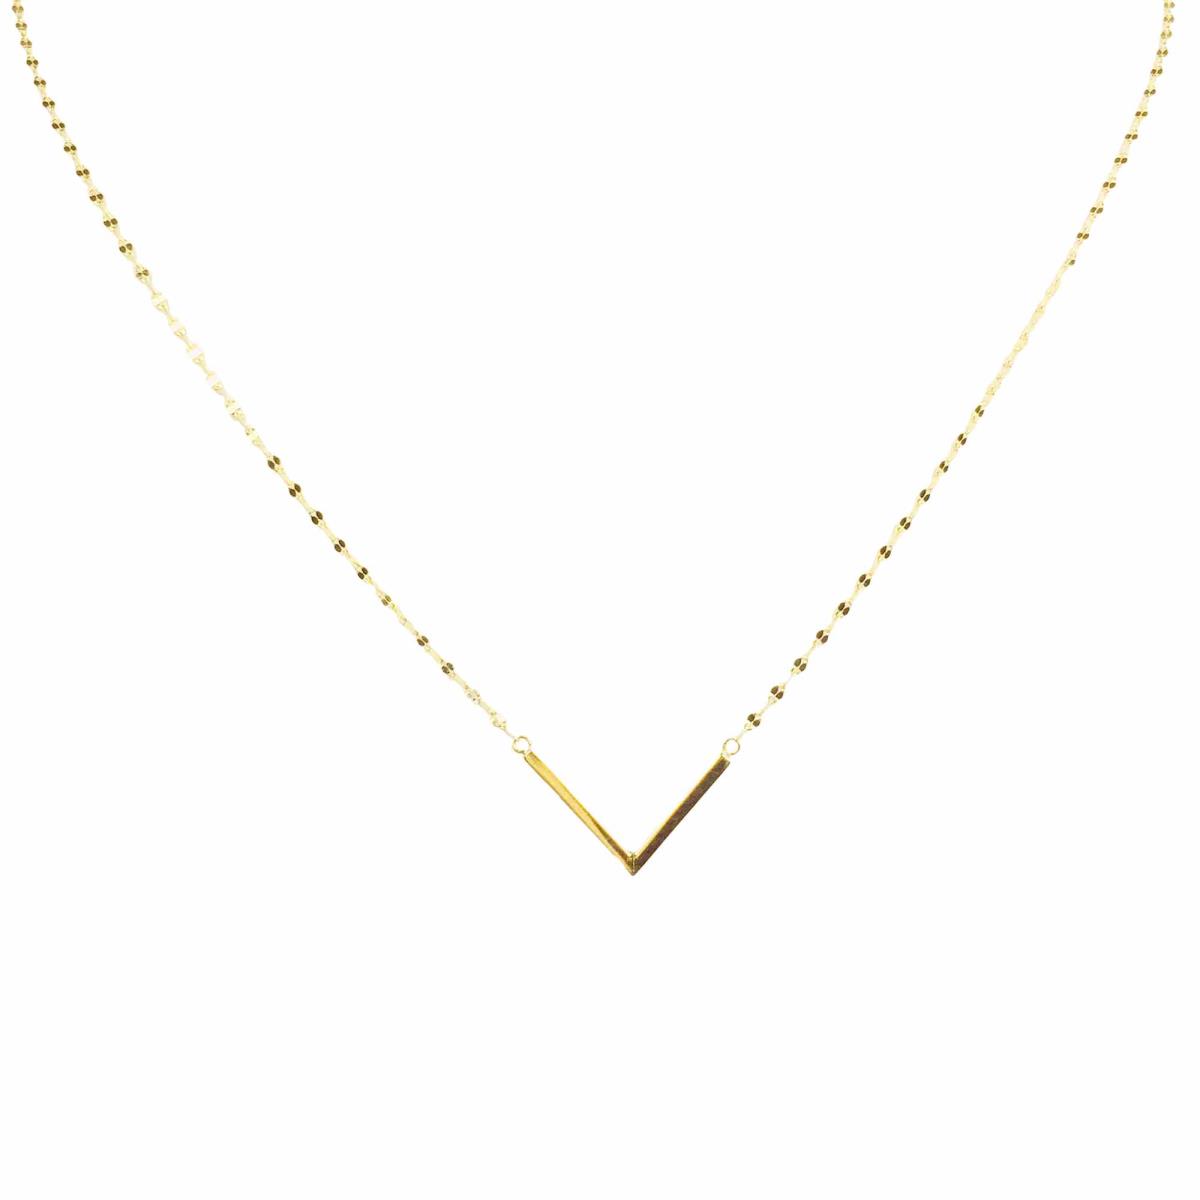 10K Yellow Gold DC Twist "V" Shaped 18" Necklace